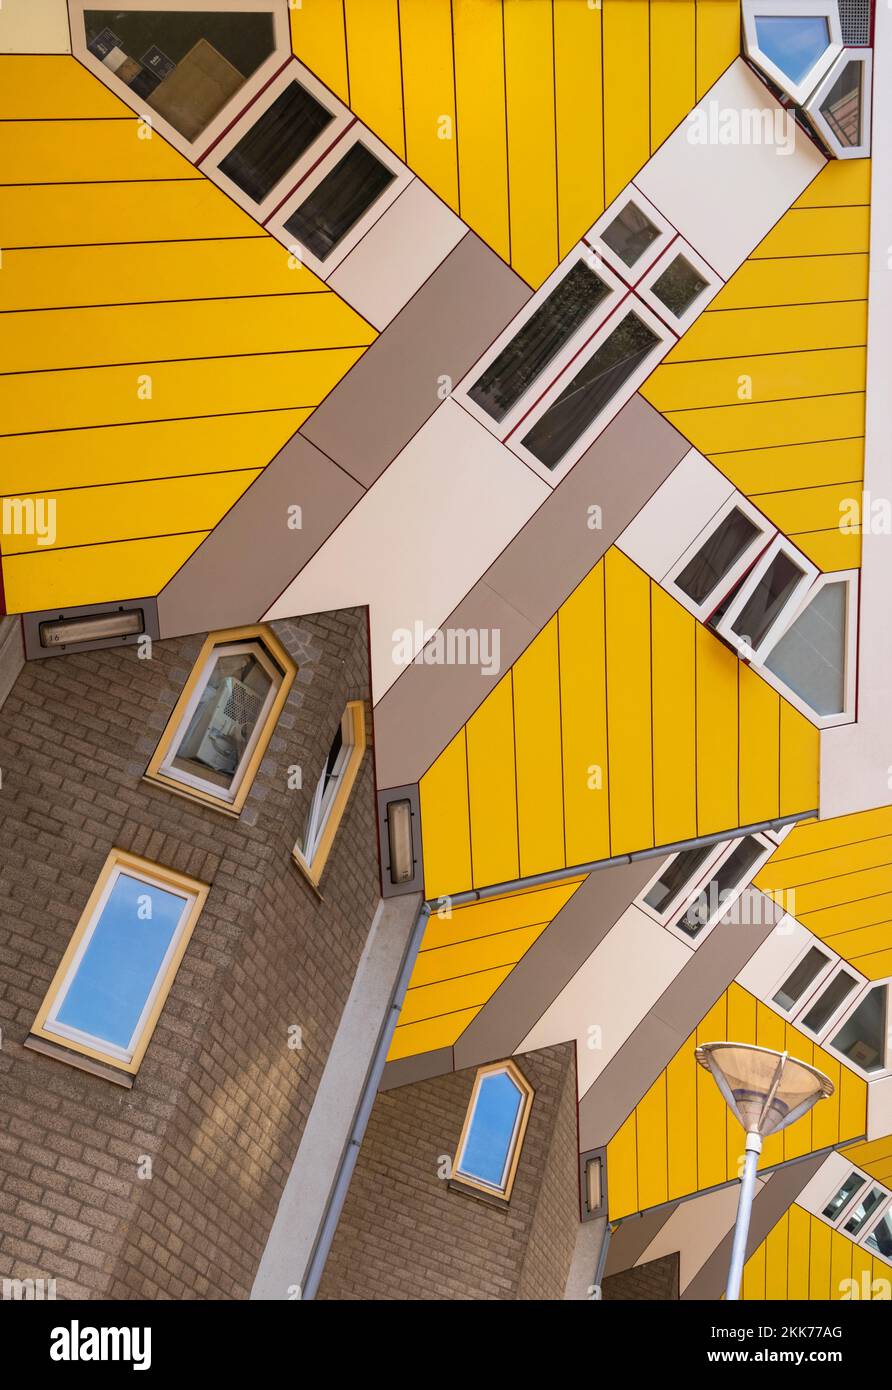 Holland, Rotterdam, The Cube Houses, an innovative housing development where each house is a cube tilted over by 45 degrees, designed by Dutch architect Piet Blom and bult between 1977 and 1984, Abstract patterns in the central area. Stock Photo